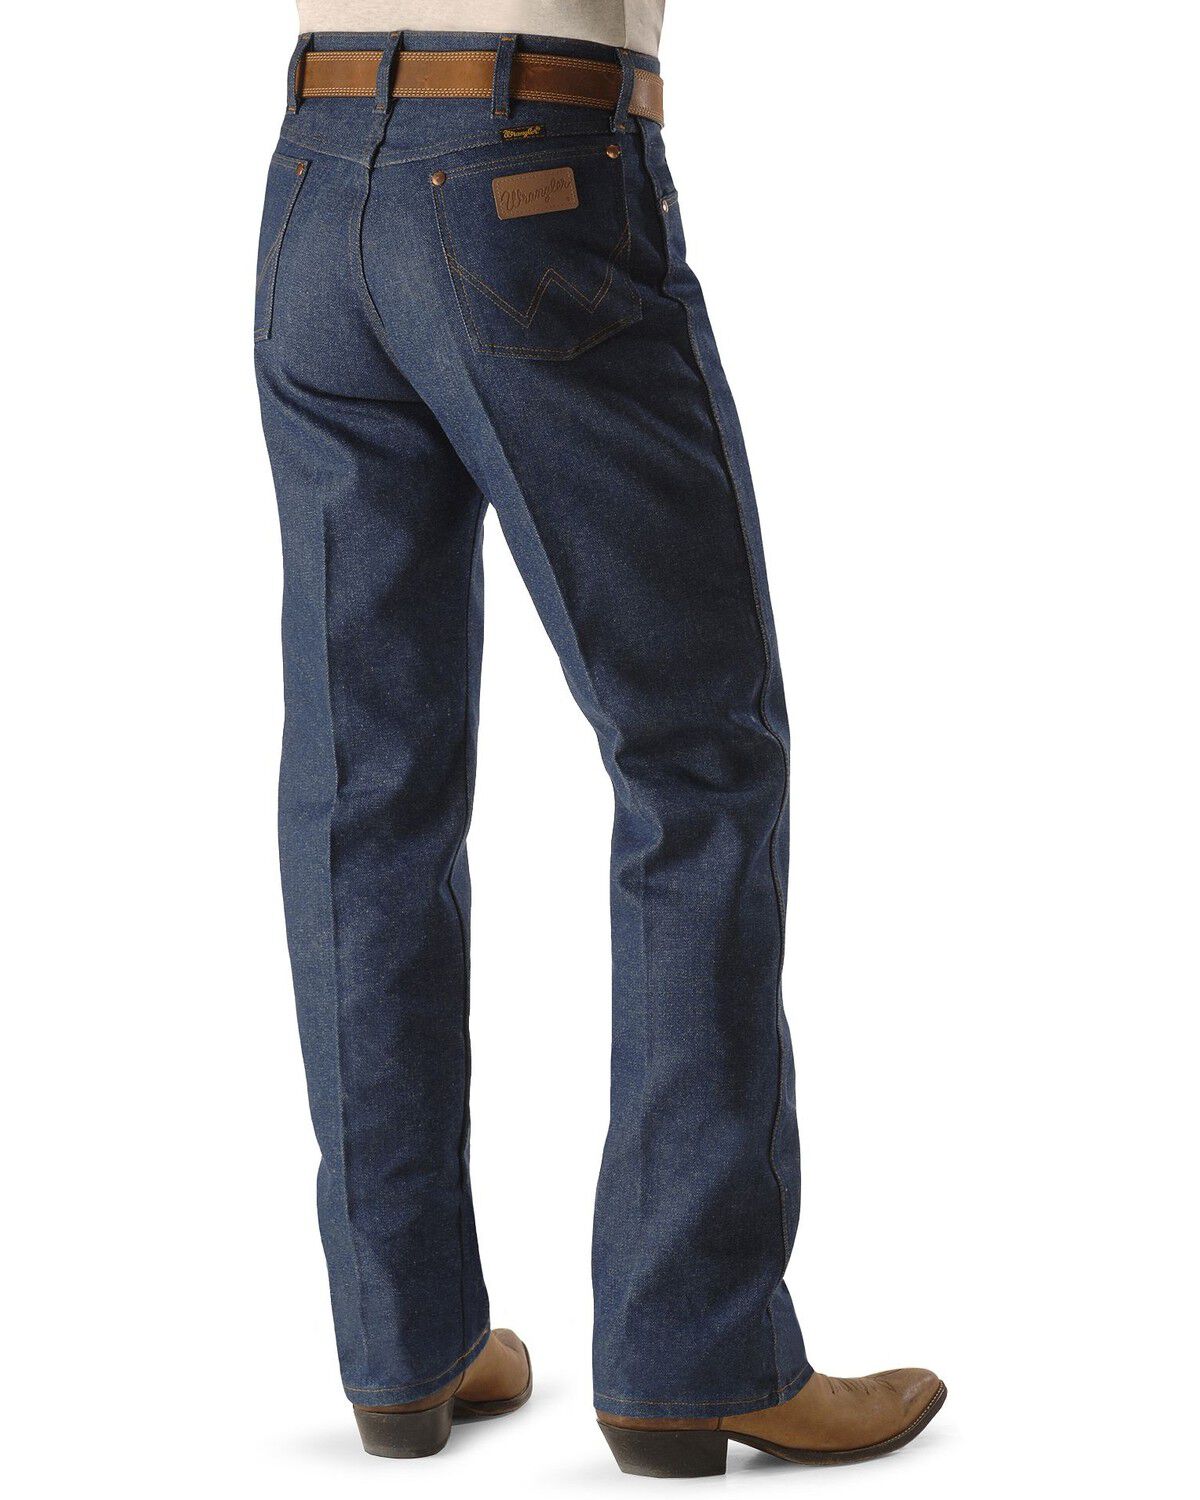 levi's waterless jeans care